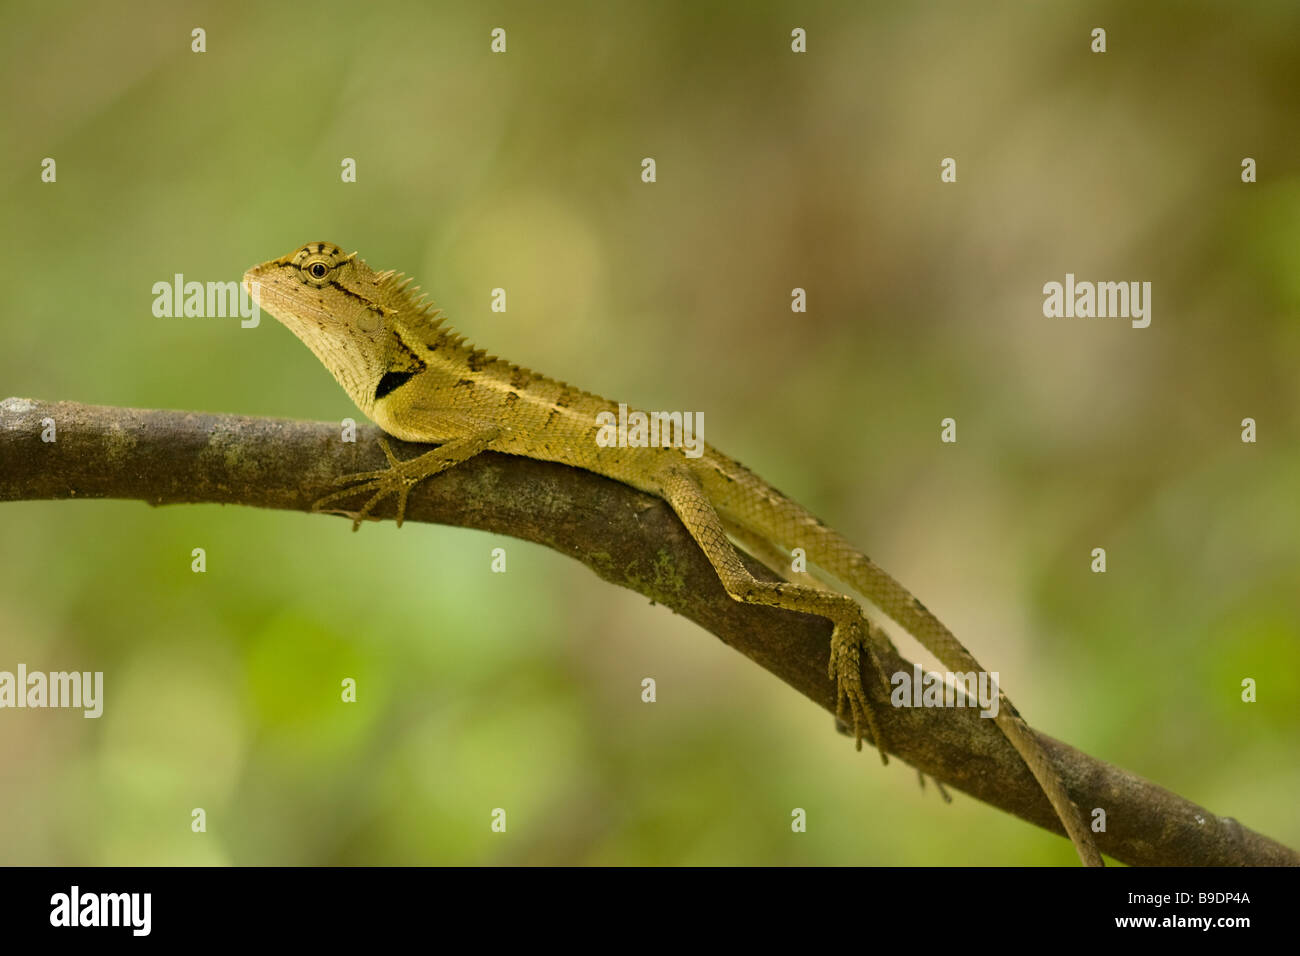 Forest Crested Lizard Calotes emma emma Stock Photo